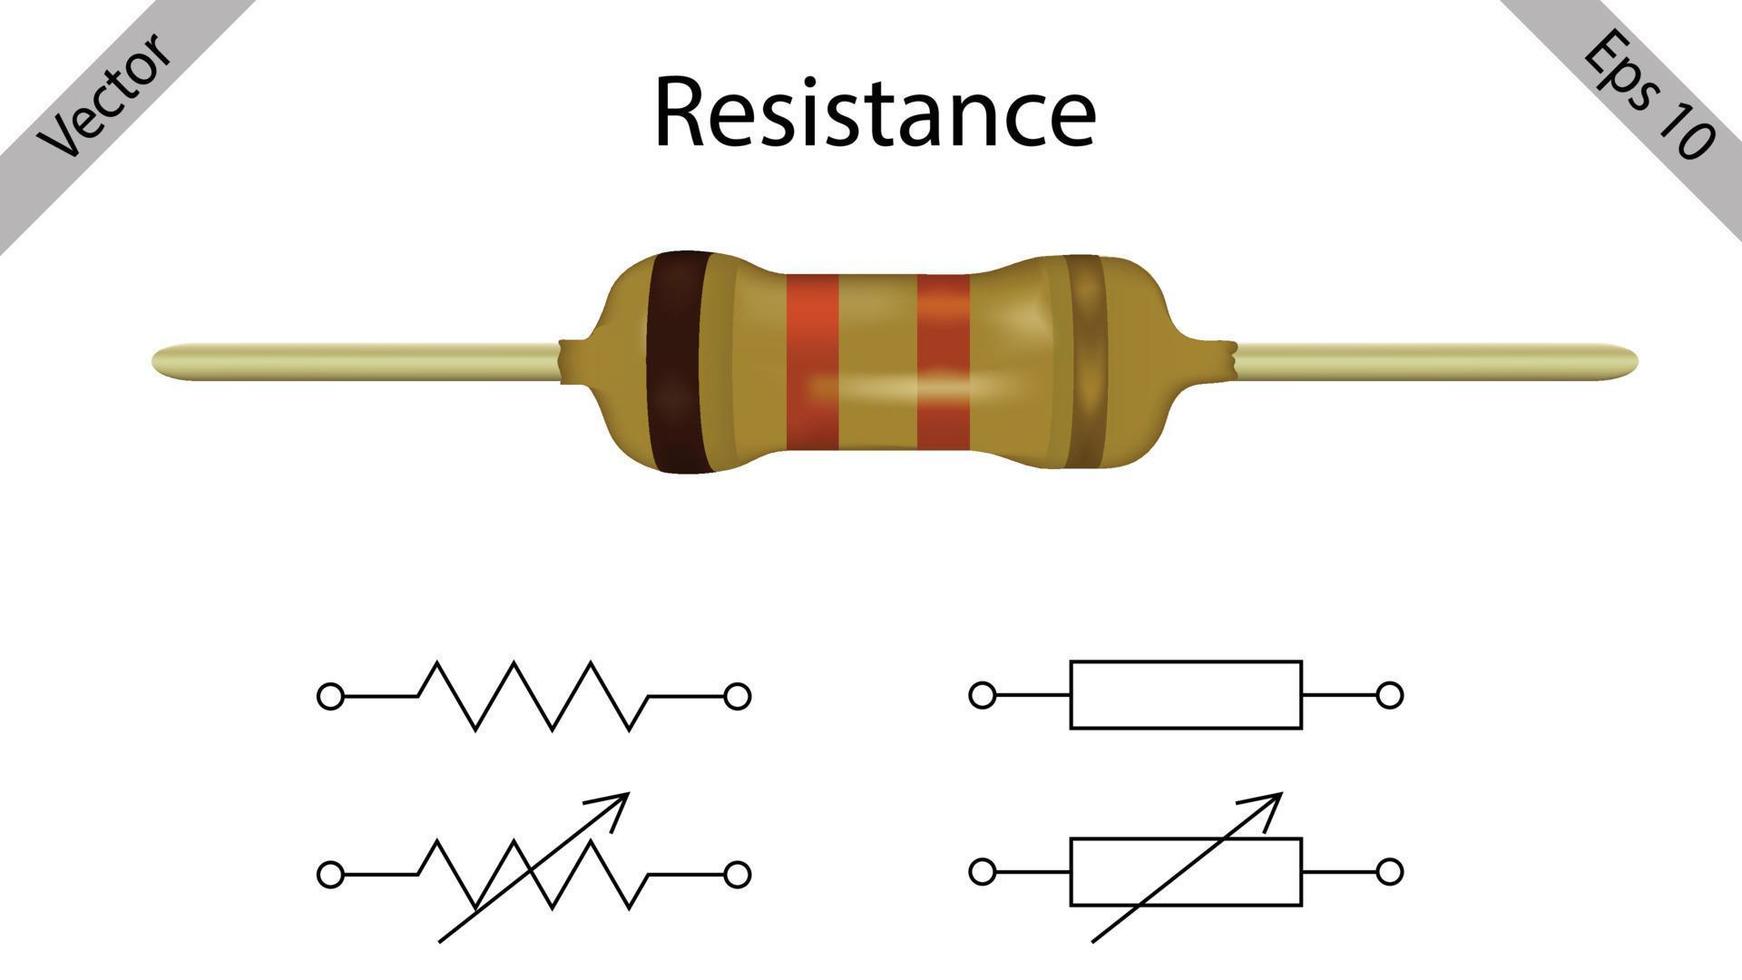 Resistor isolated electrical part vector resistor vector, Resistance electronic symbol.